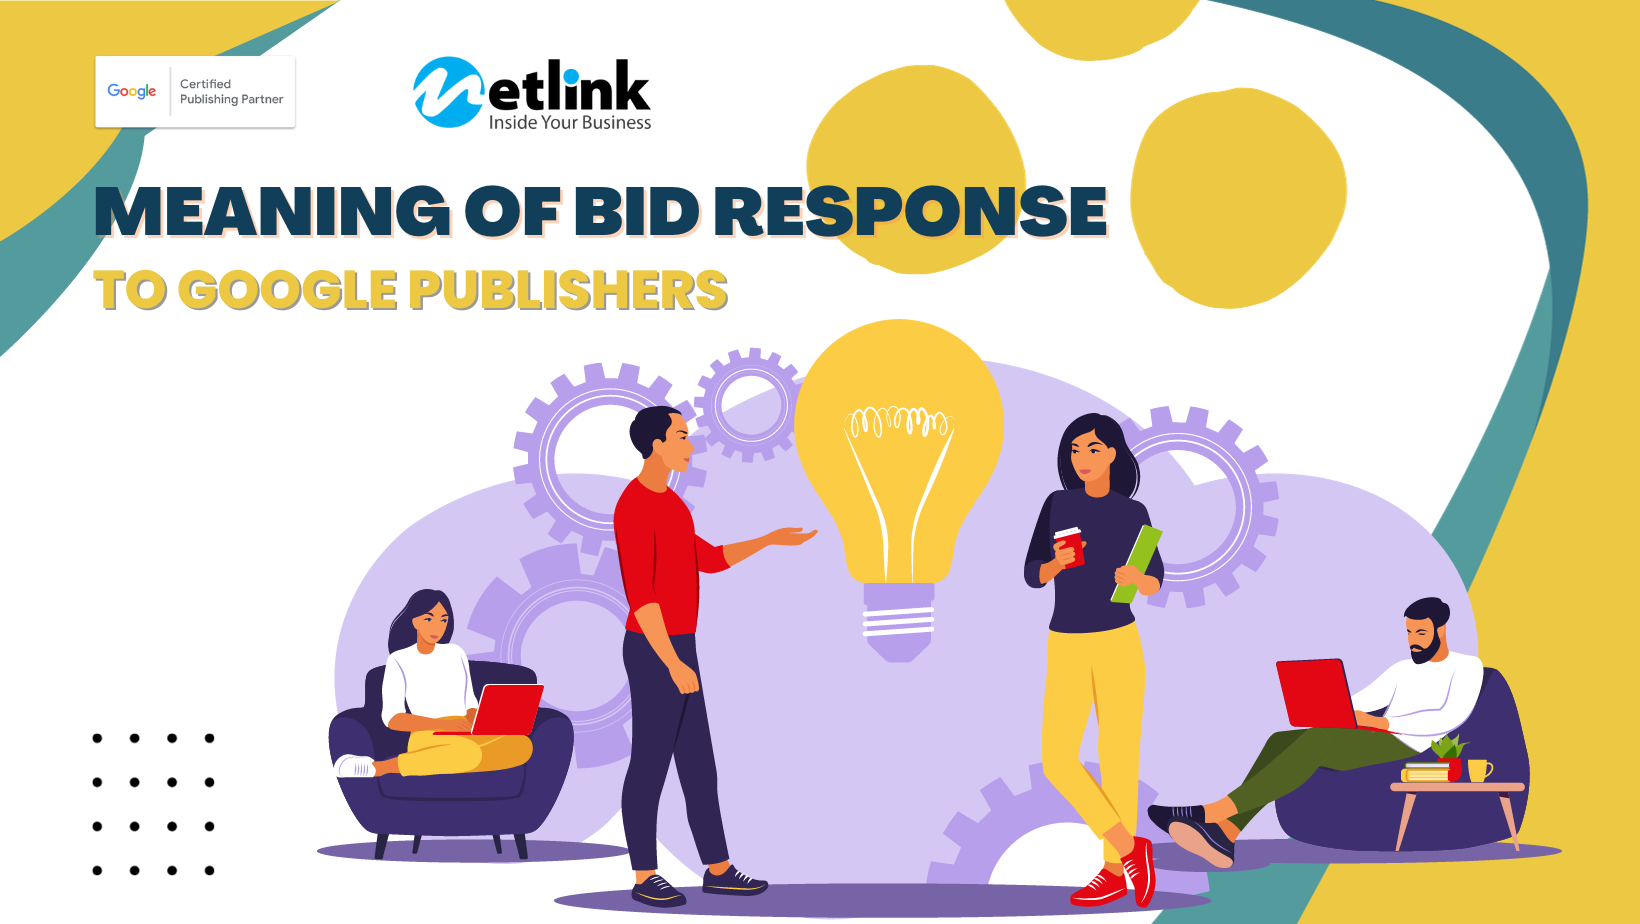 Meaning of Bid Response to Google Publishers